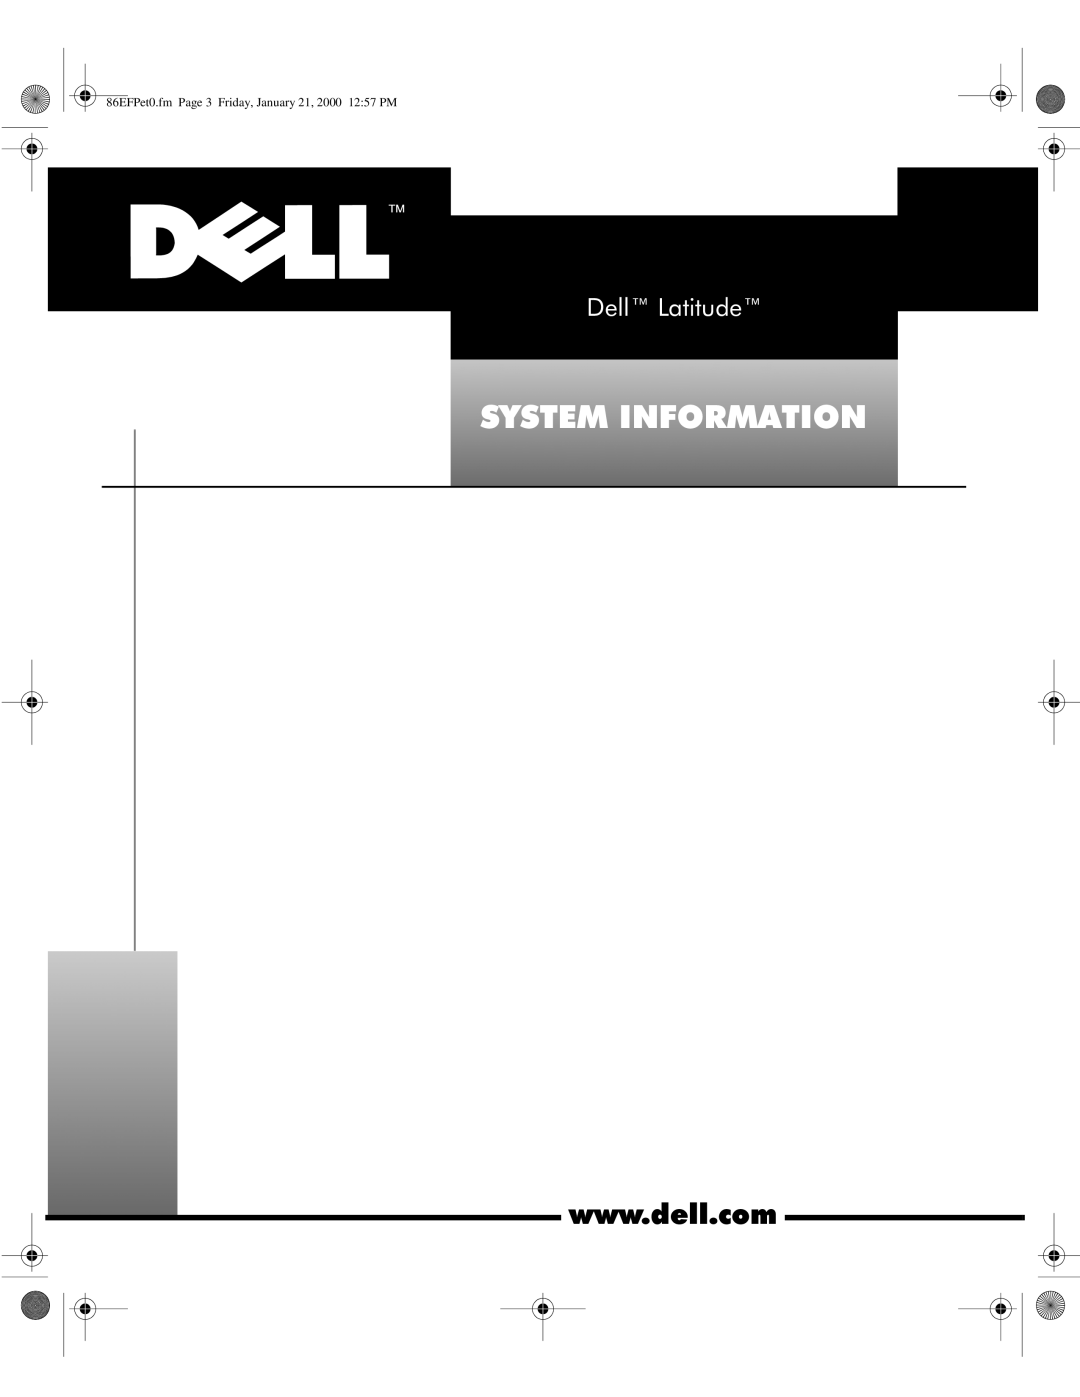 Dell PPX manual 6670,1250$7,21, Zzzghoofrp, Hooœ/Dwlwxghœ, 86EFPet0.fm Page 3 Friday, January 21, 2000 1257 PM 